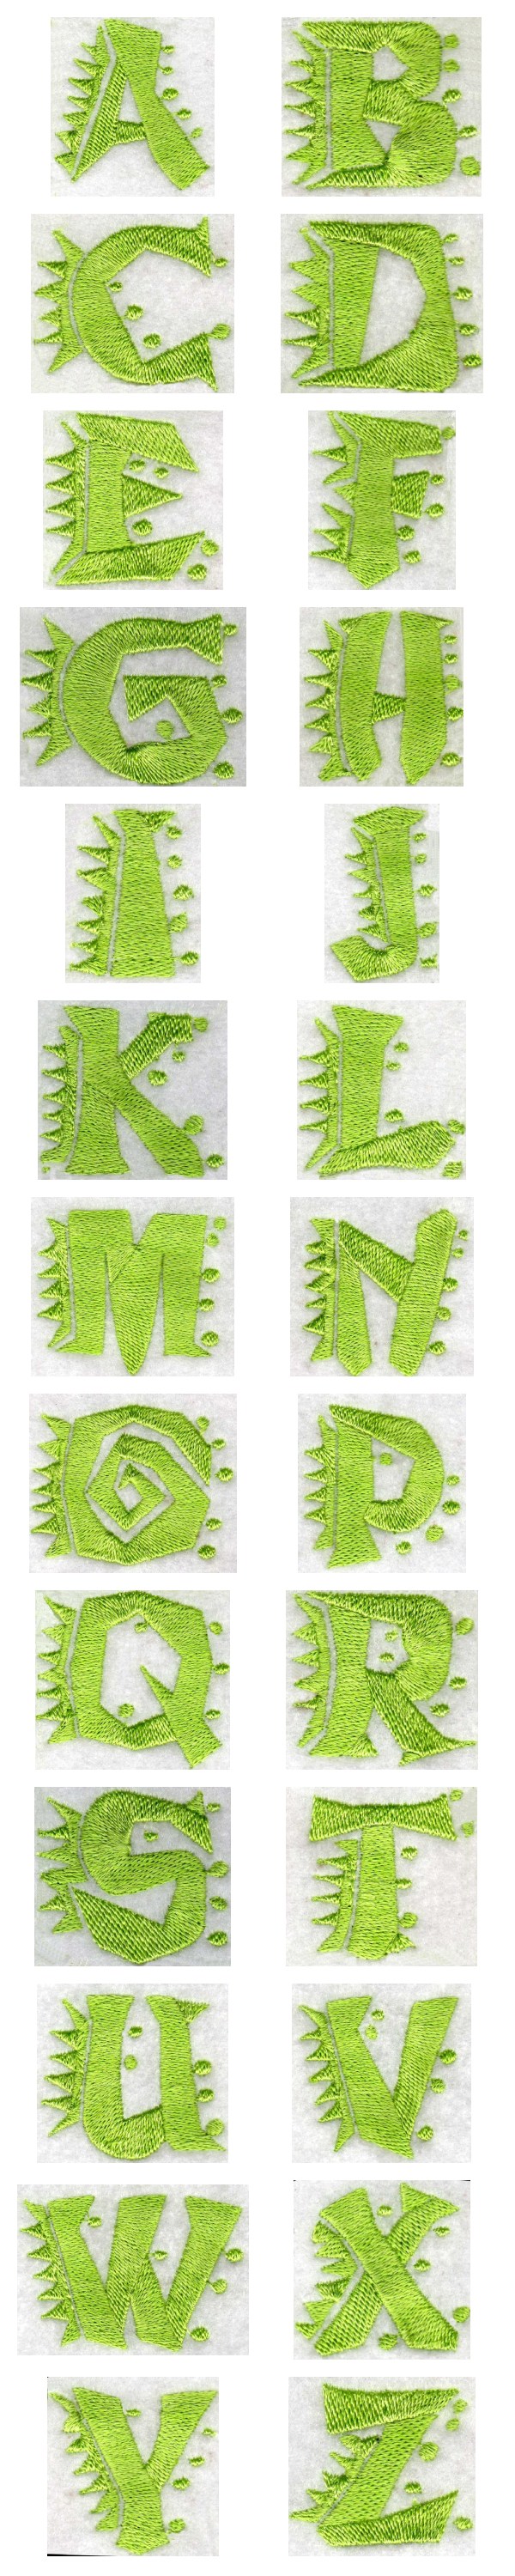 Spiky Font Embroidery Machine Design Details